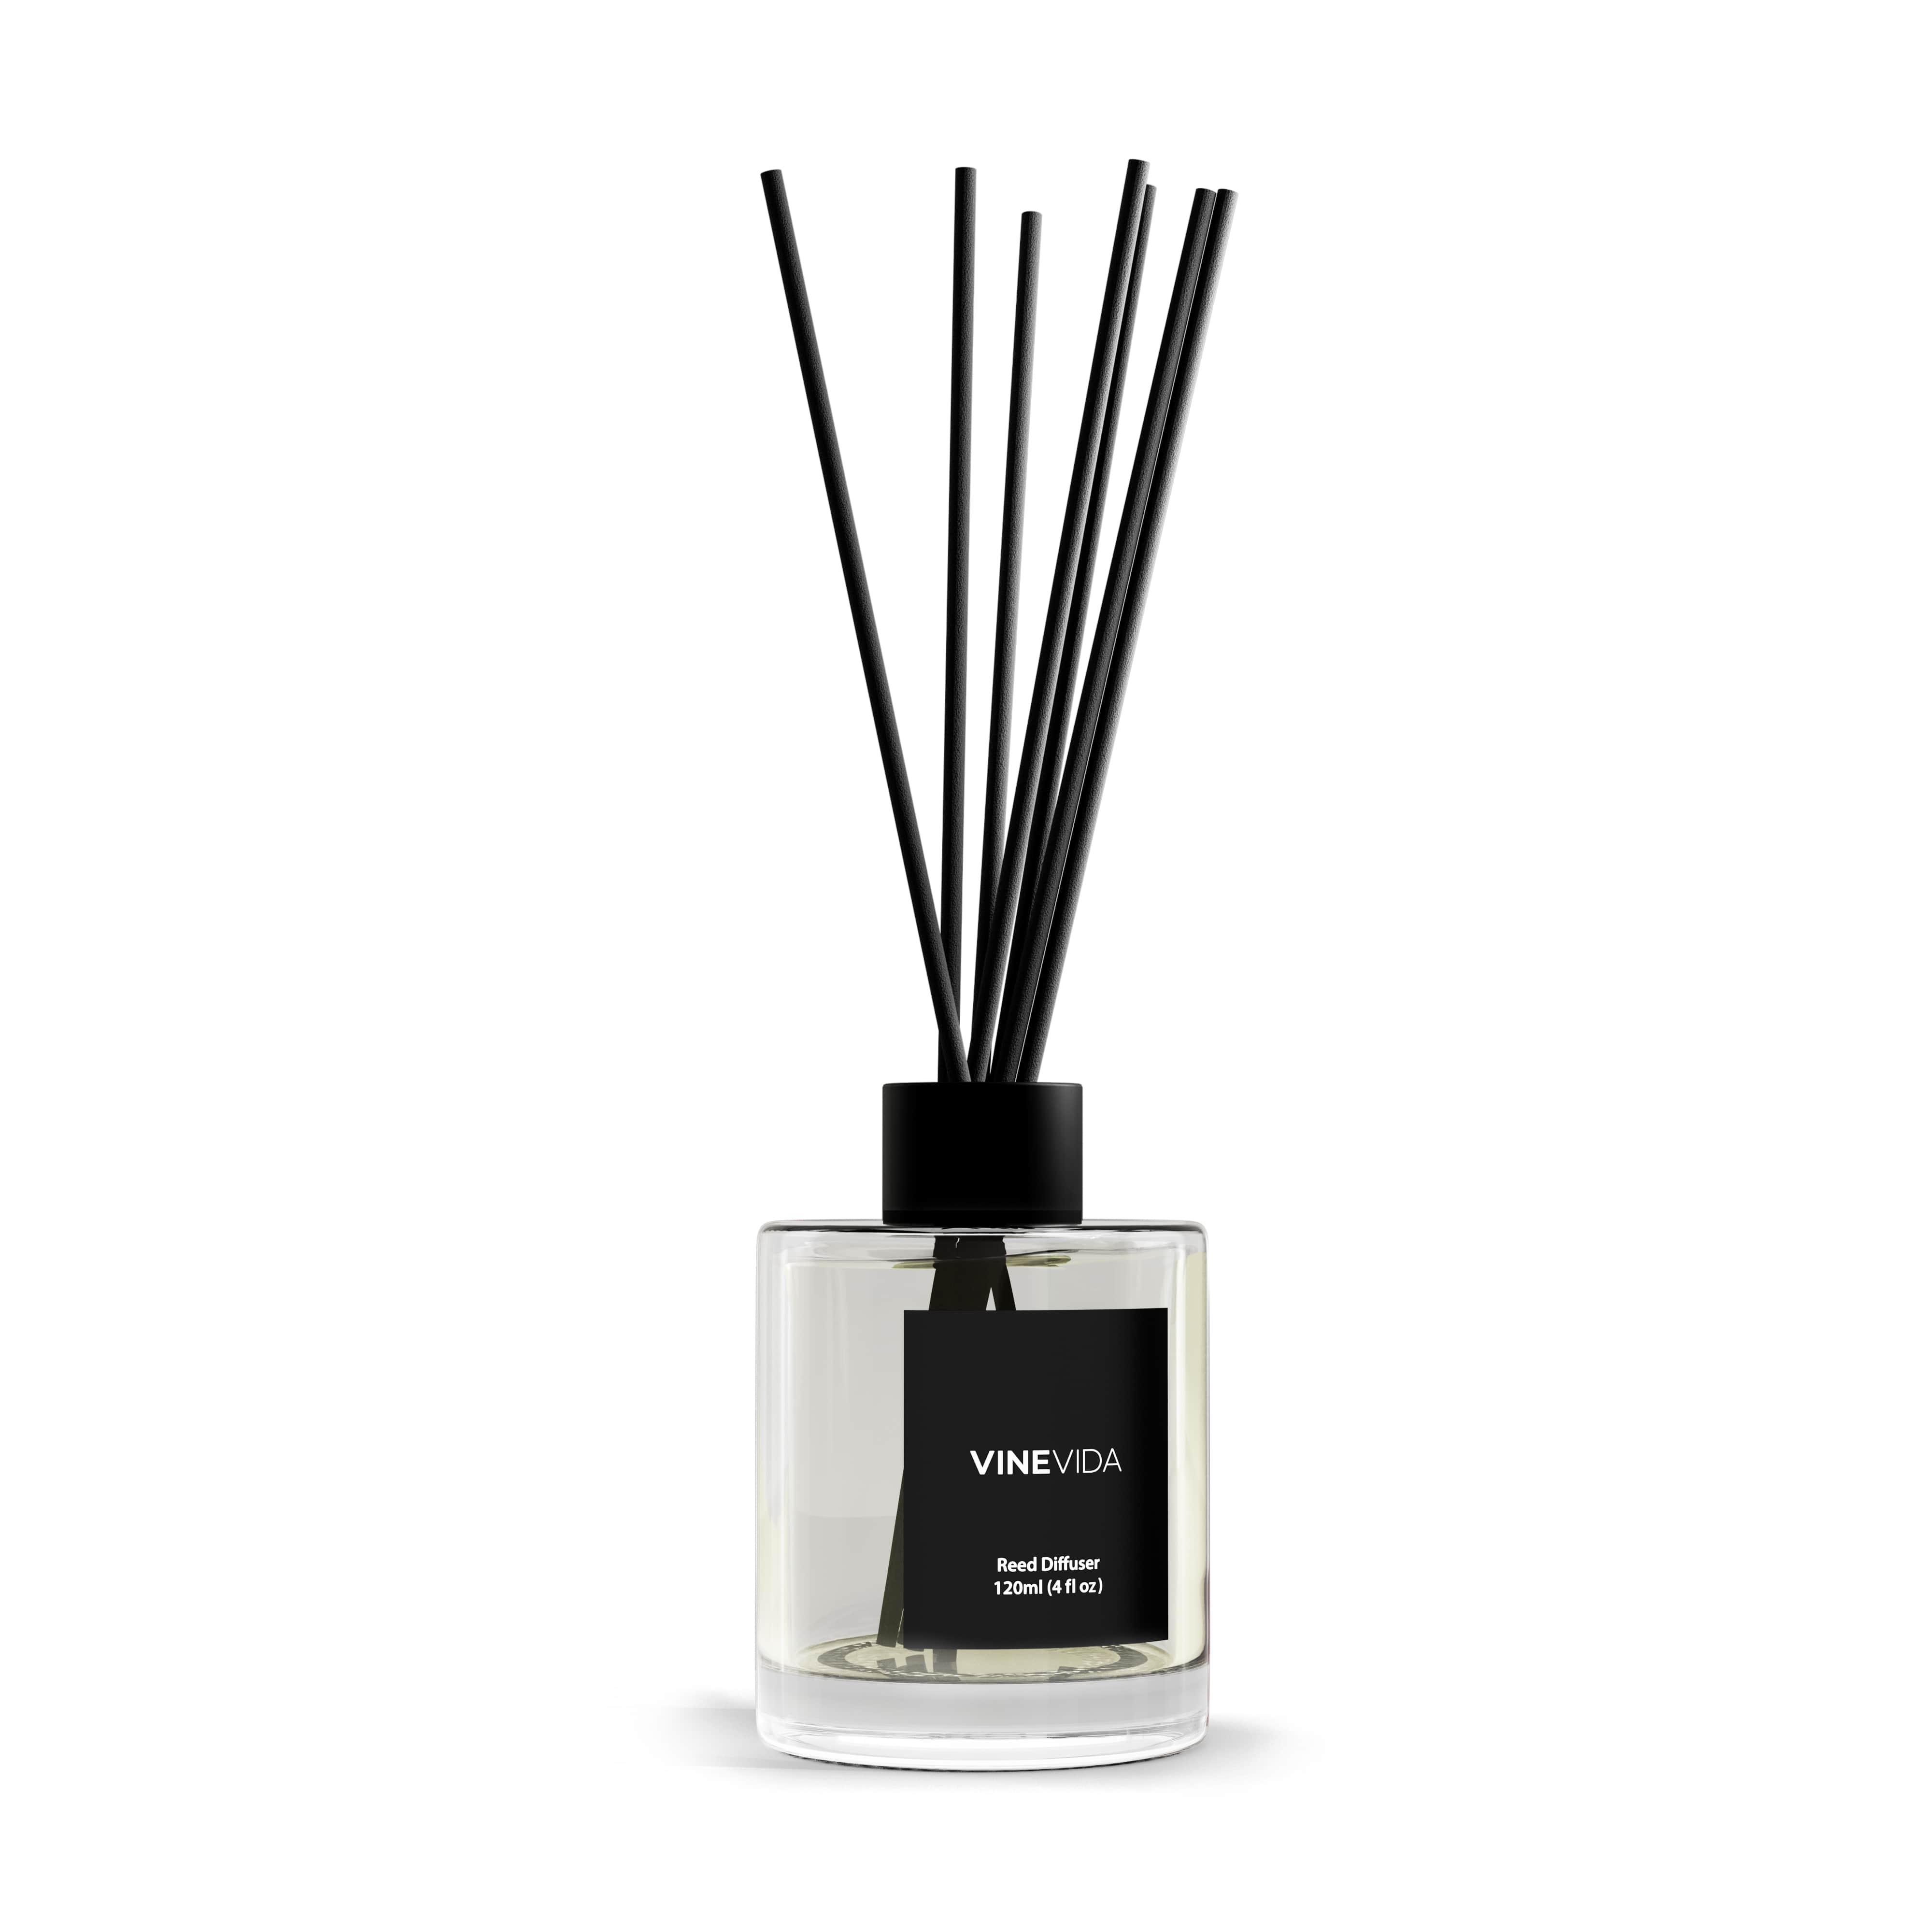 NO. 1102 Reed Diffuser - Inspired by: Bali Mango by Bath & Body Works